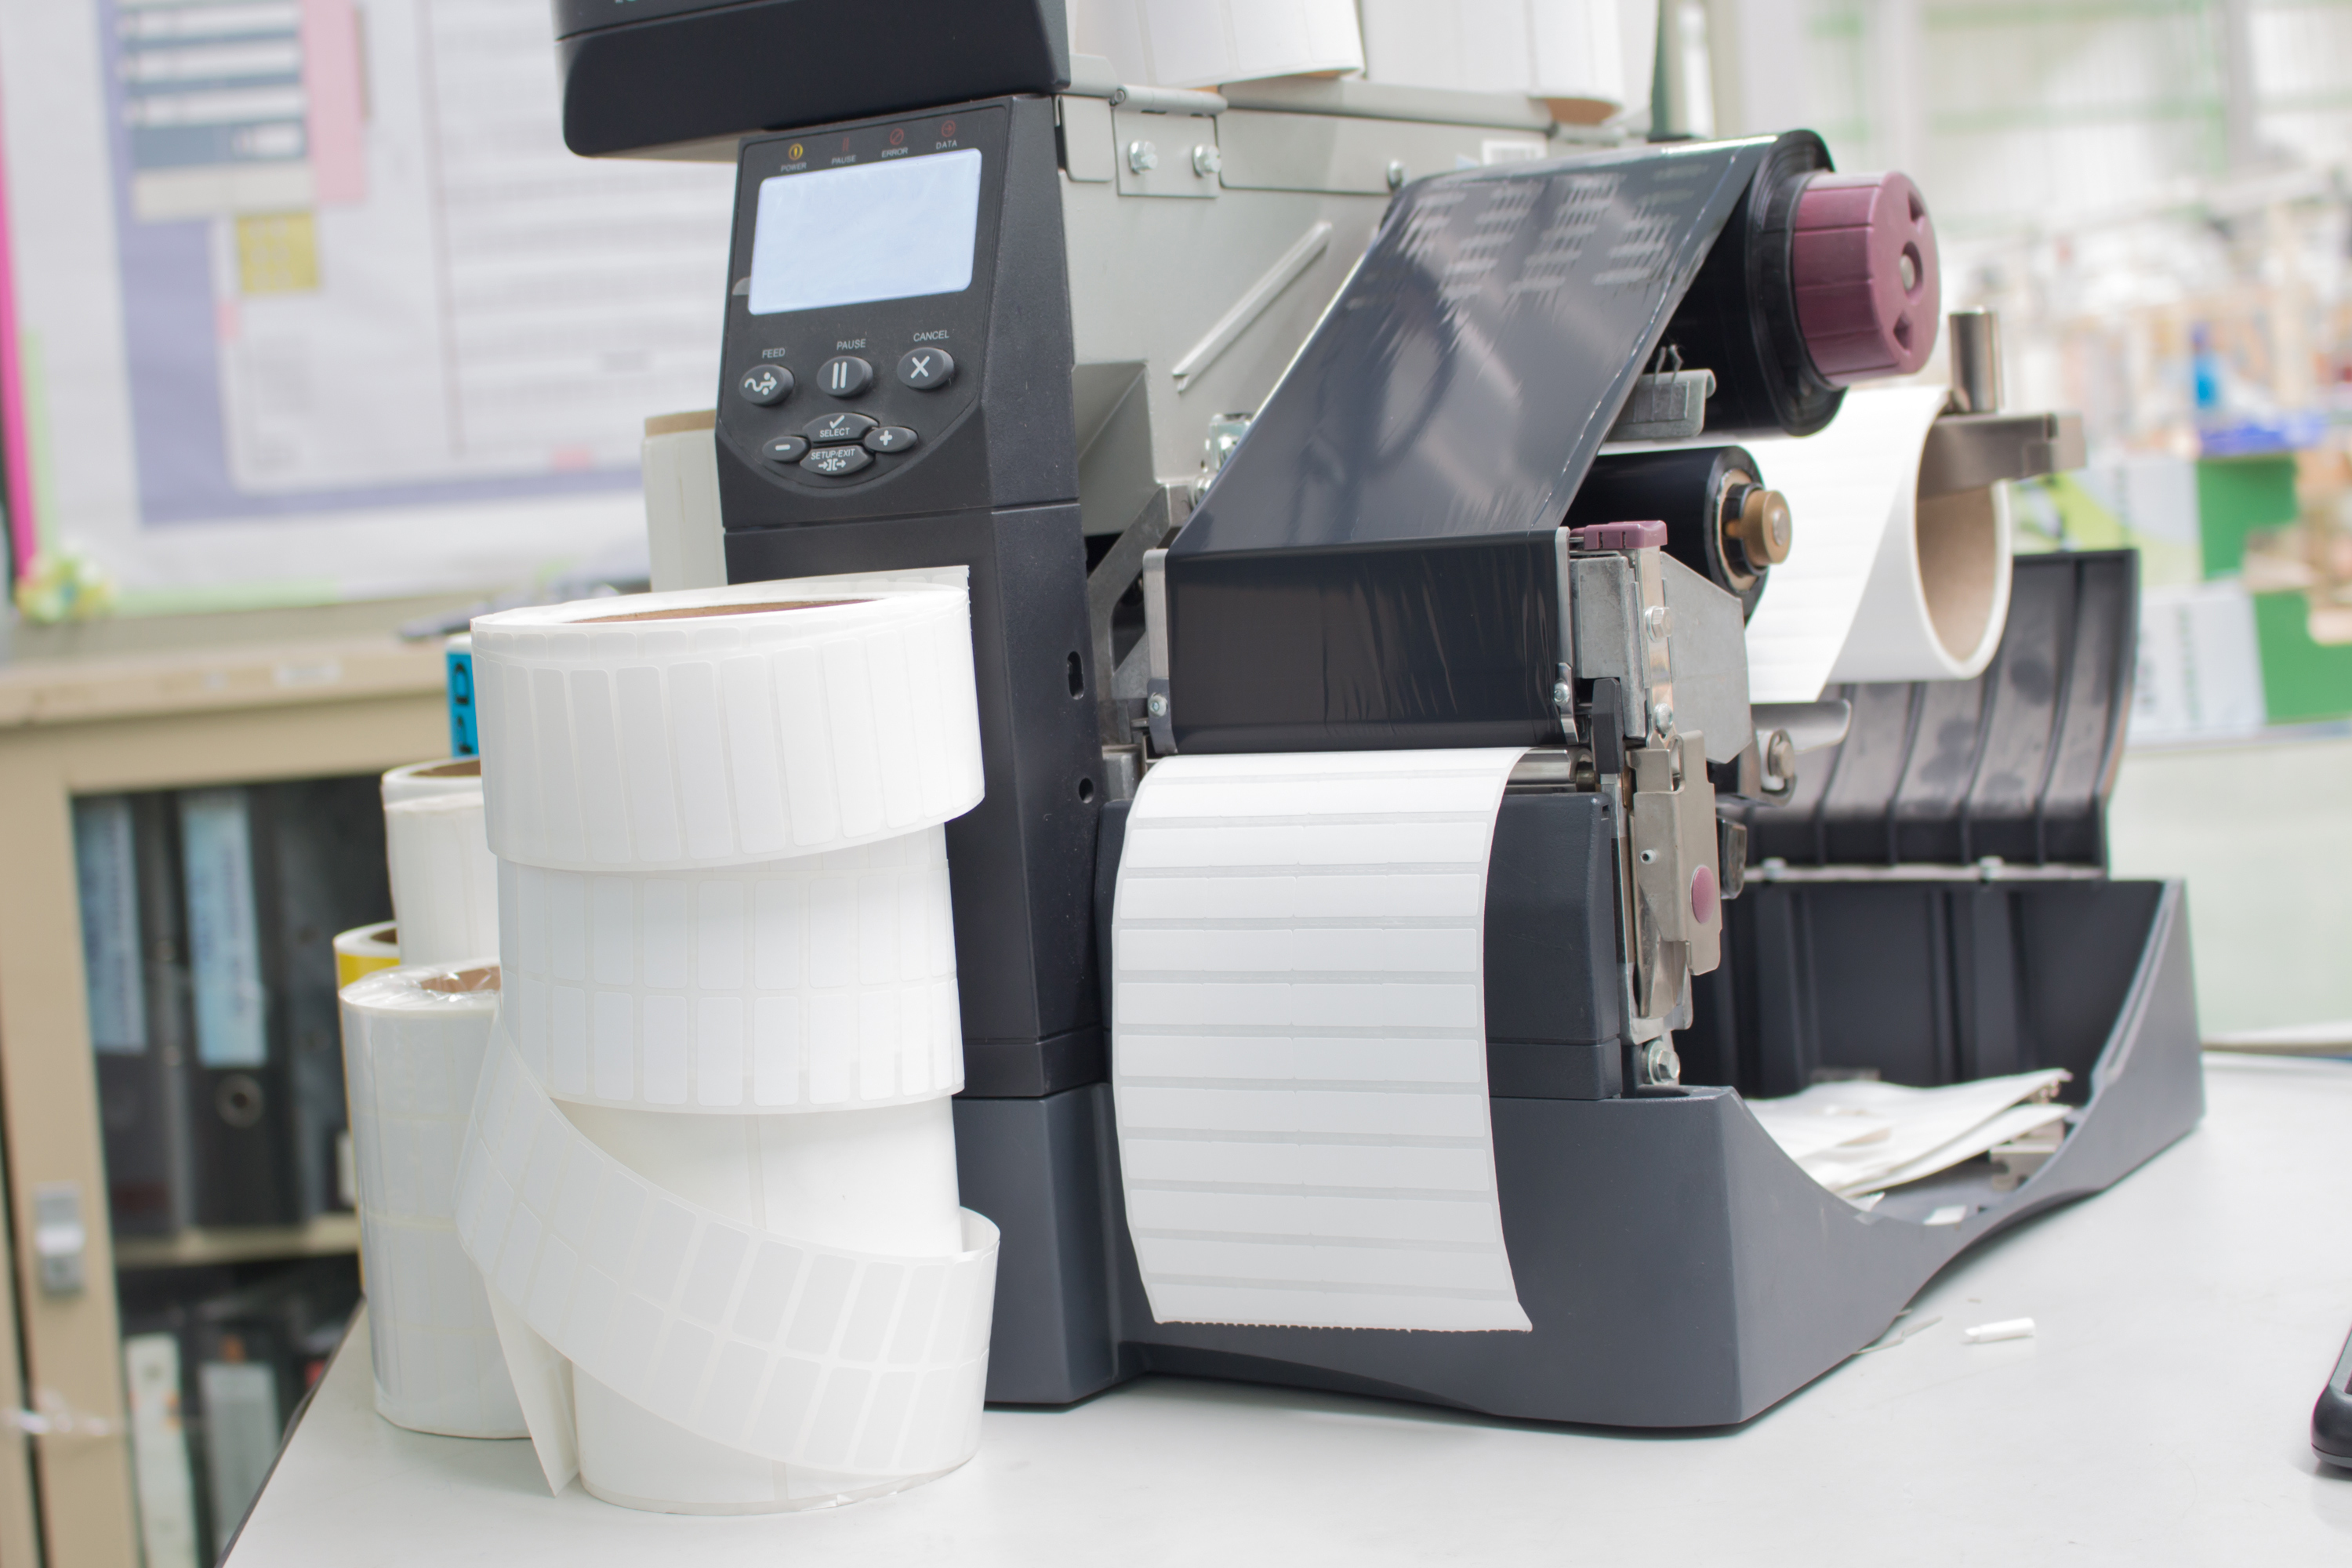 direct thermal printer with rolls of labels